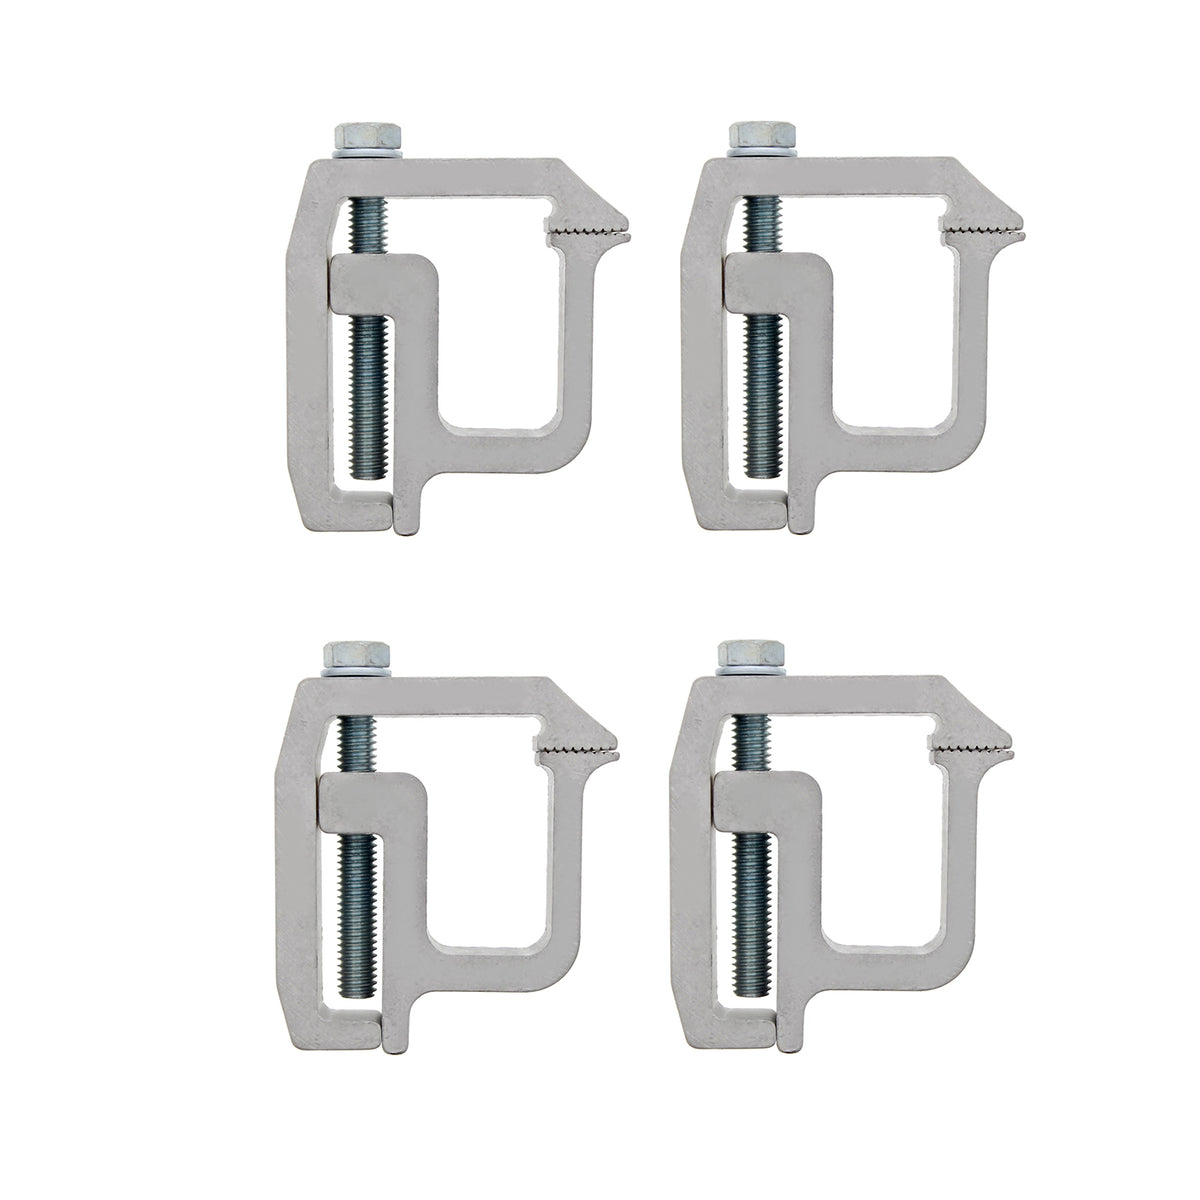 Truck Topper Clamps - 4 Pack Canopy and Truck Cap Mounting Clamps